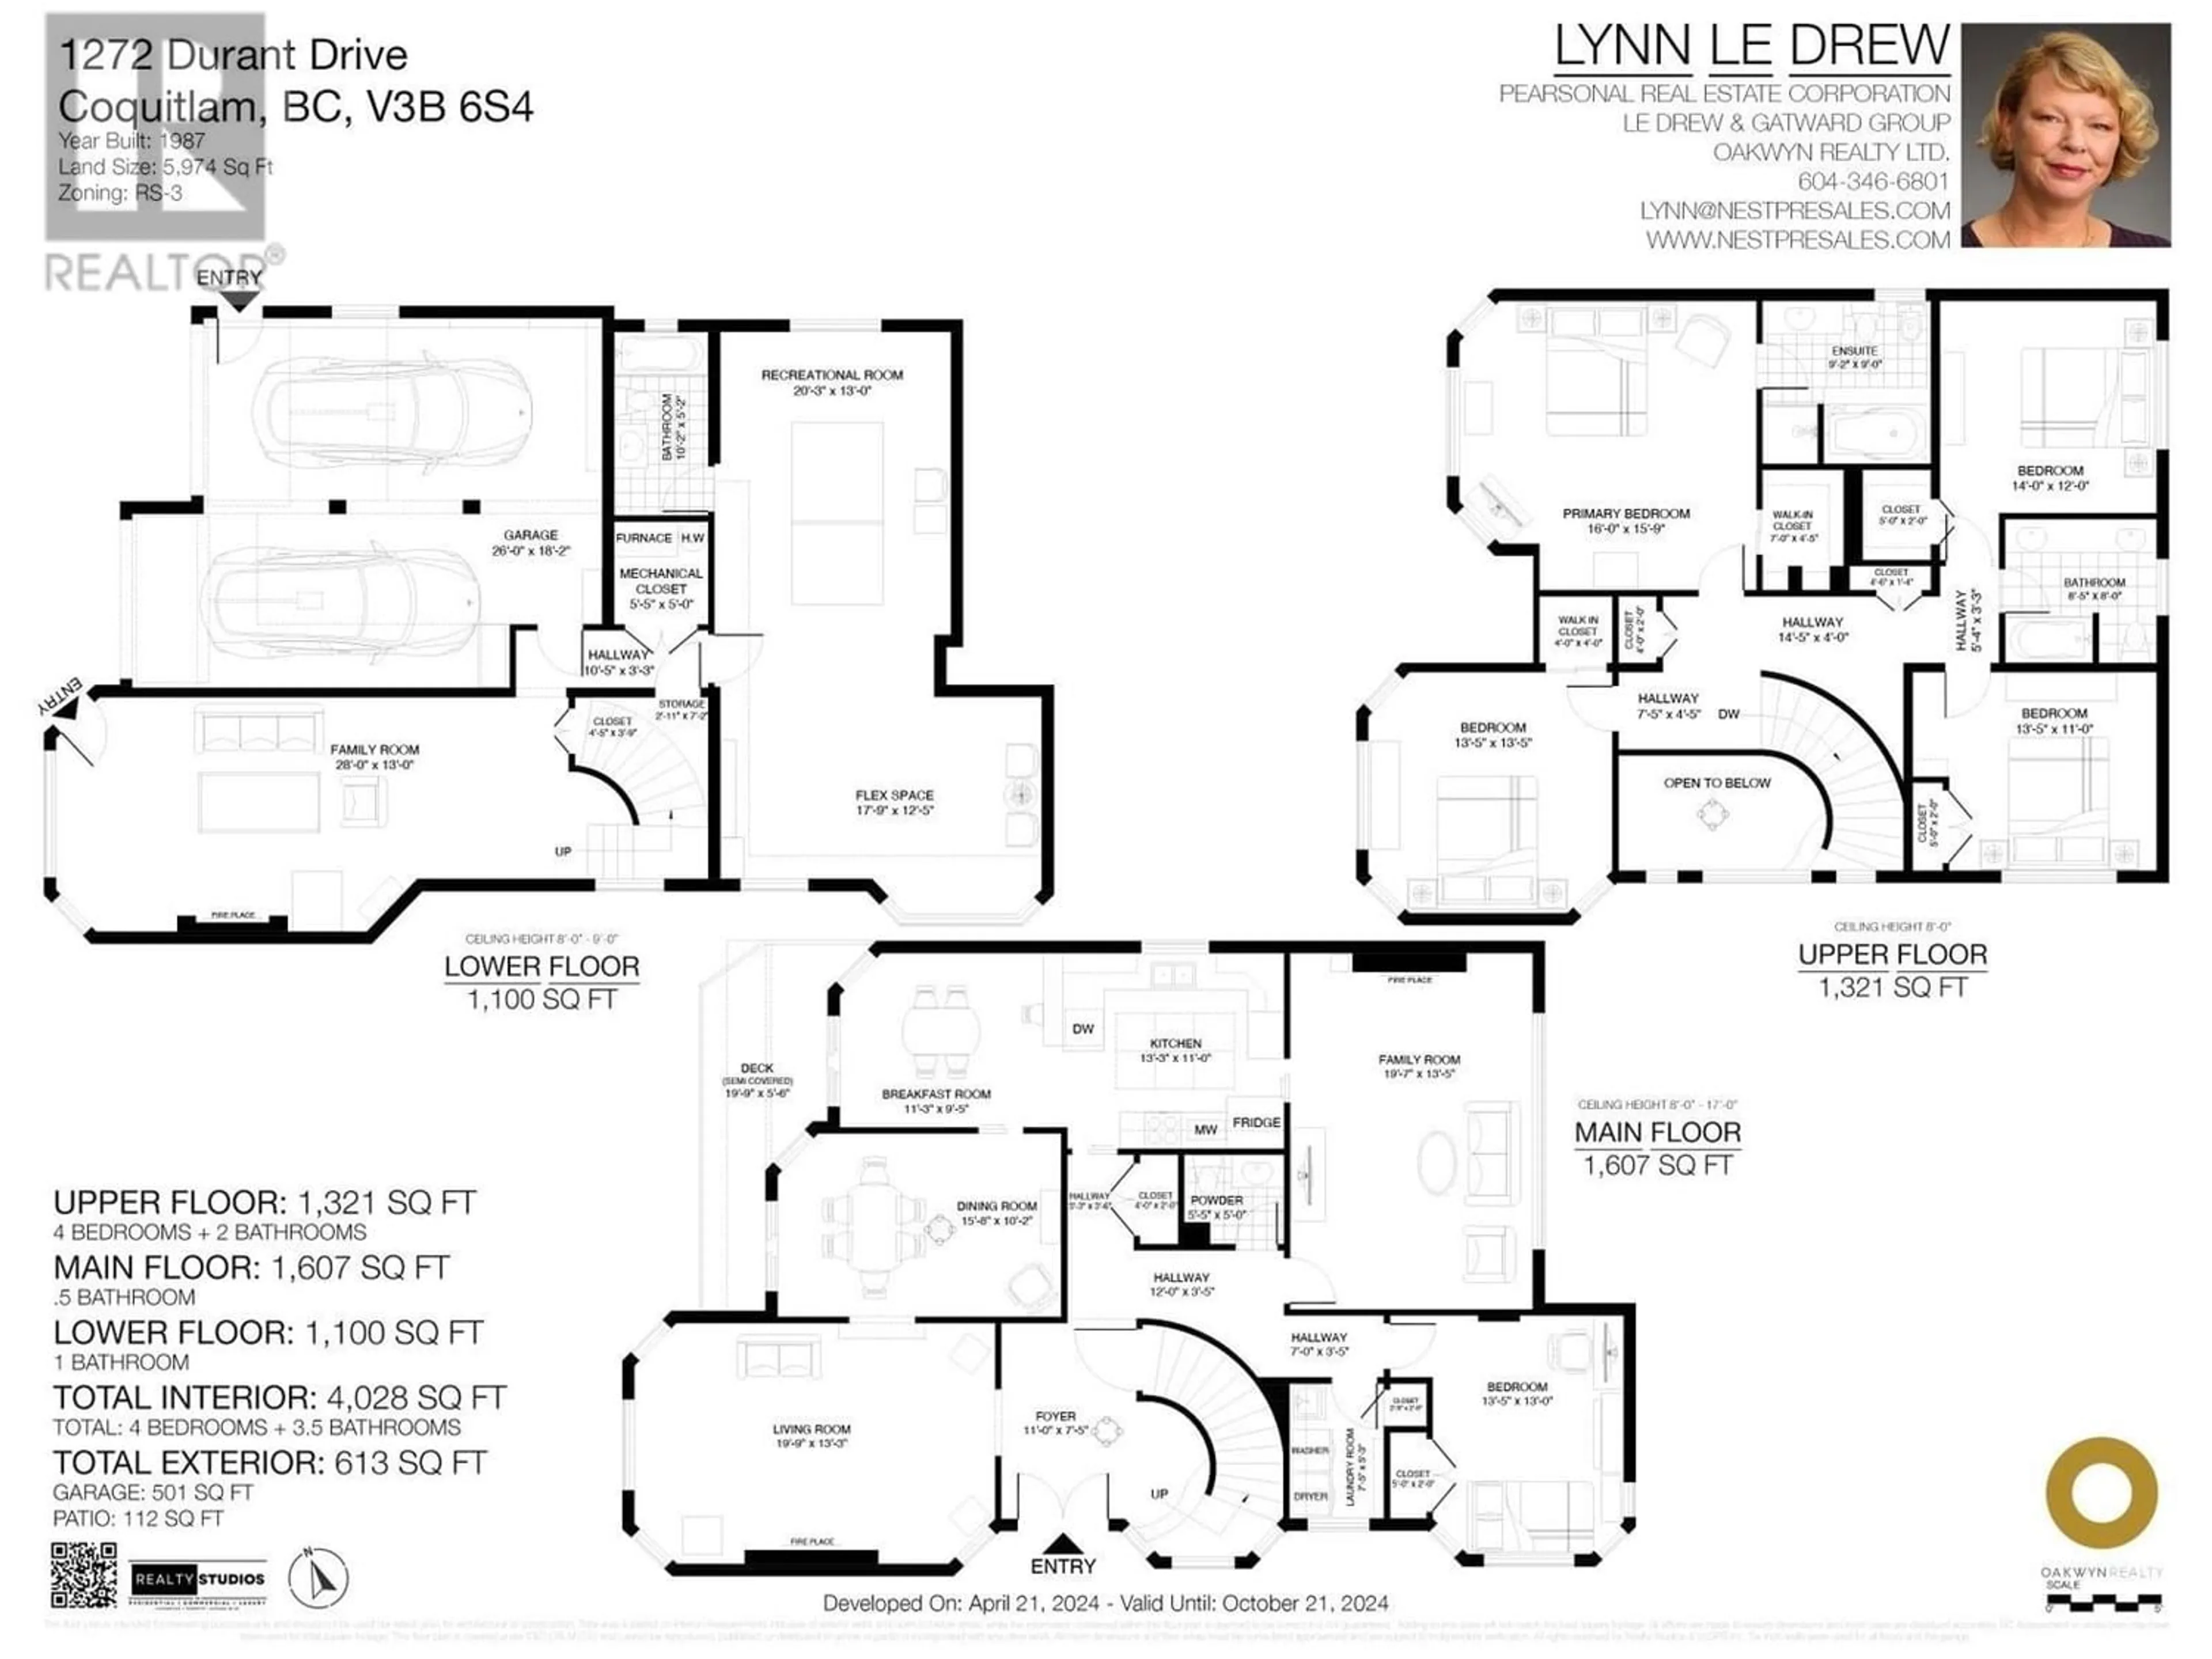 Floor plan for 1272 DURANT DRIVE, Coquitlam British Columbia V3B6S4